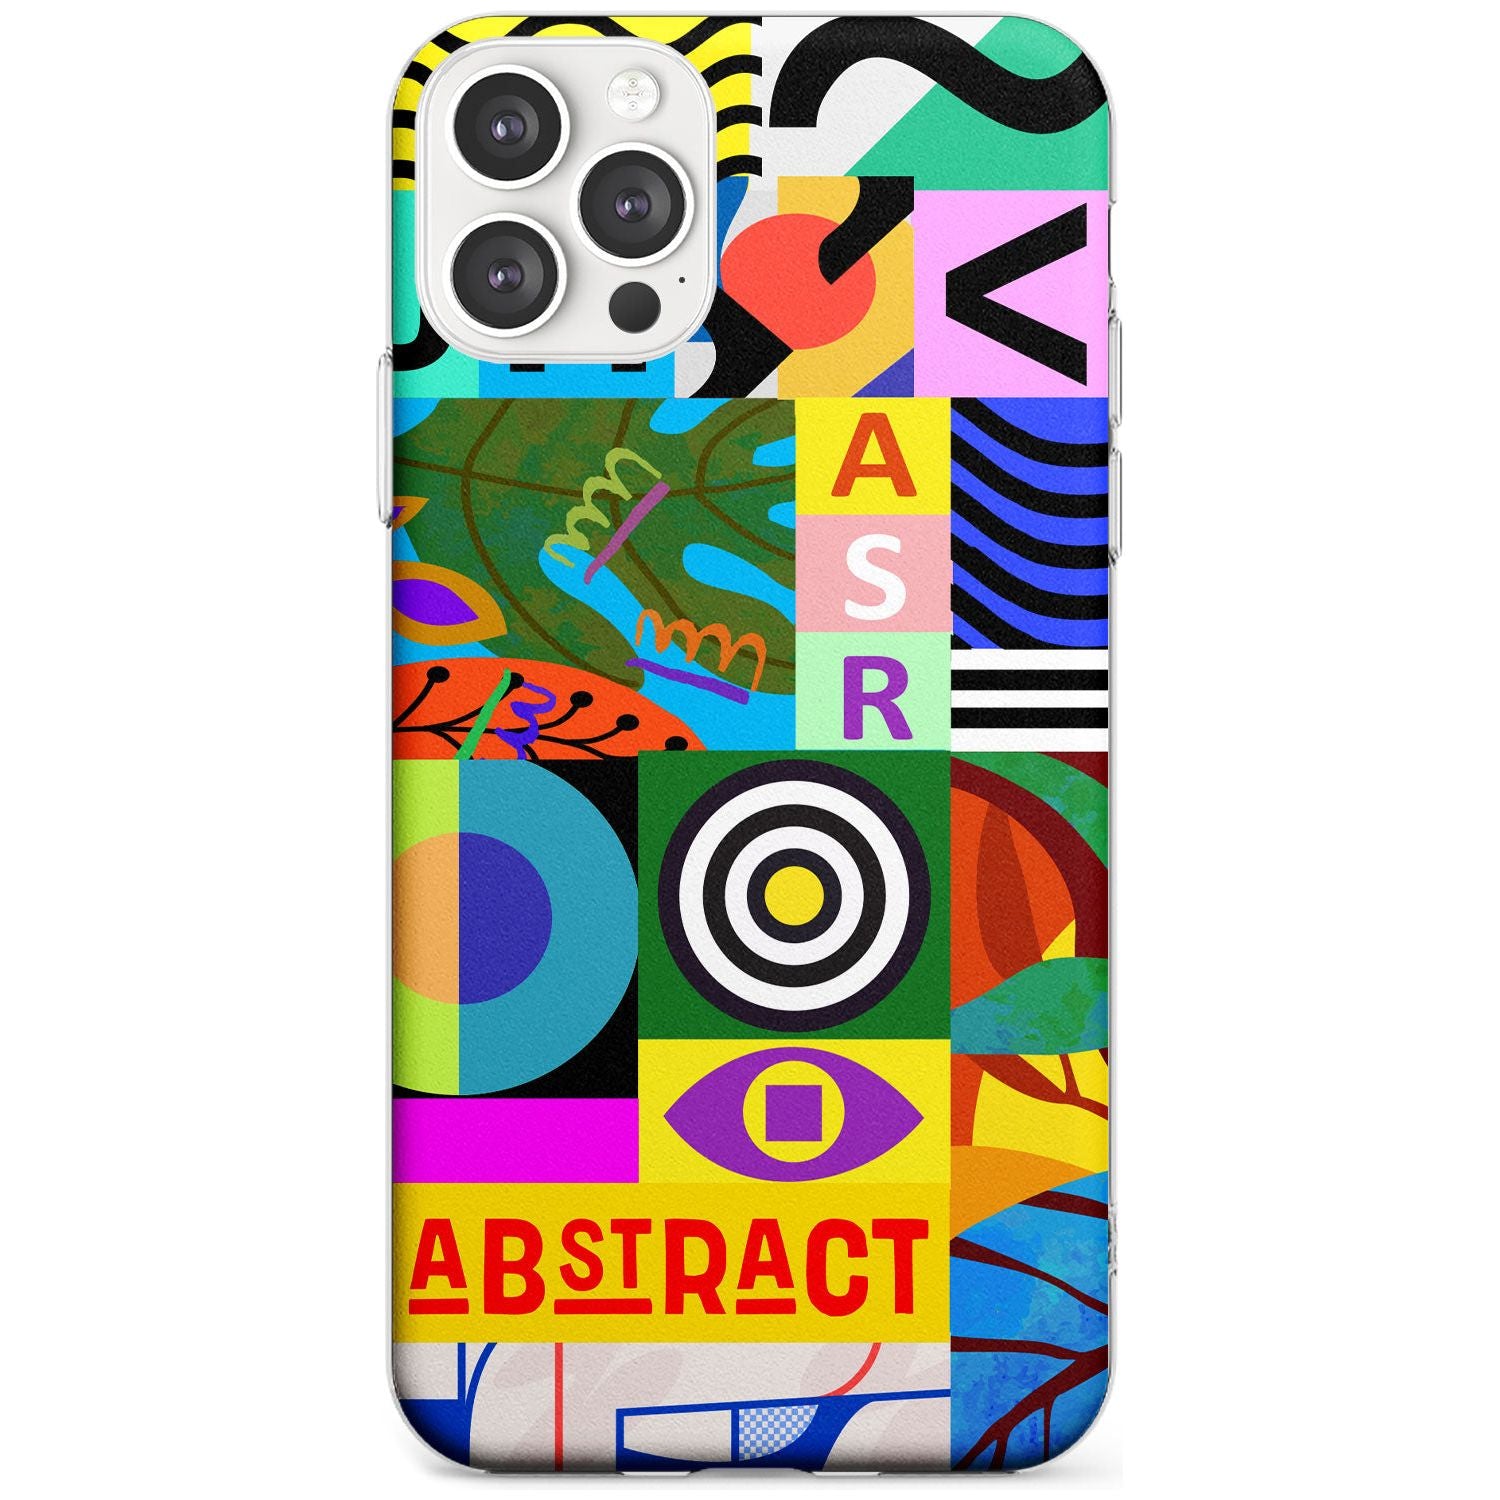 Patchwork Black Impact Phone Case for iPhone 11 Pro Max